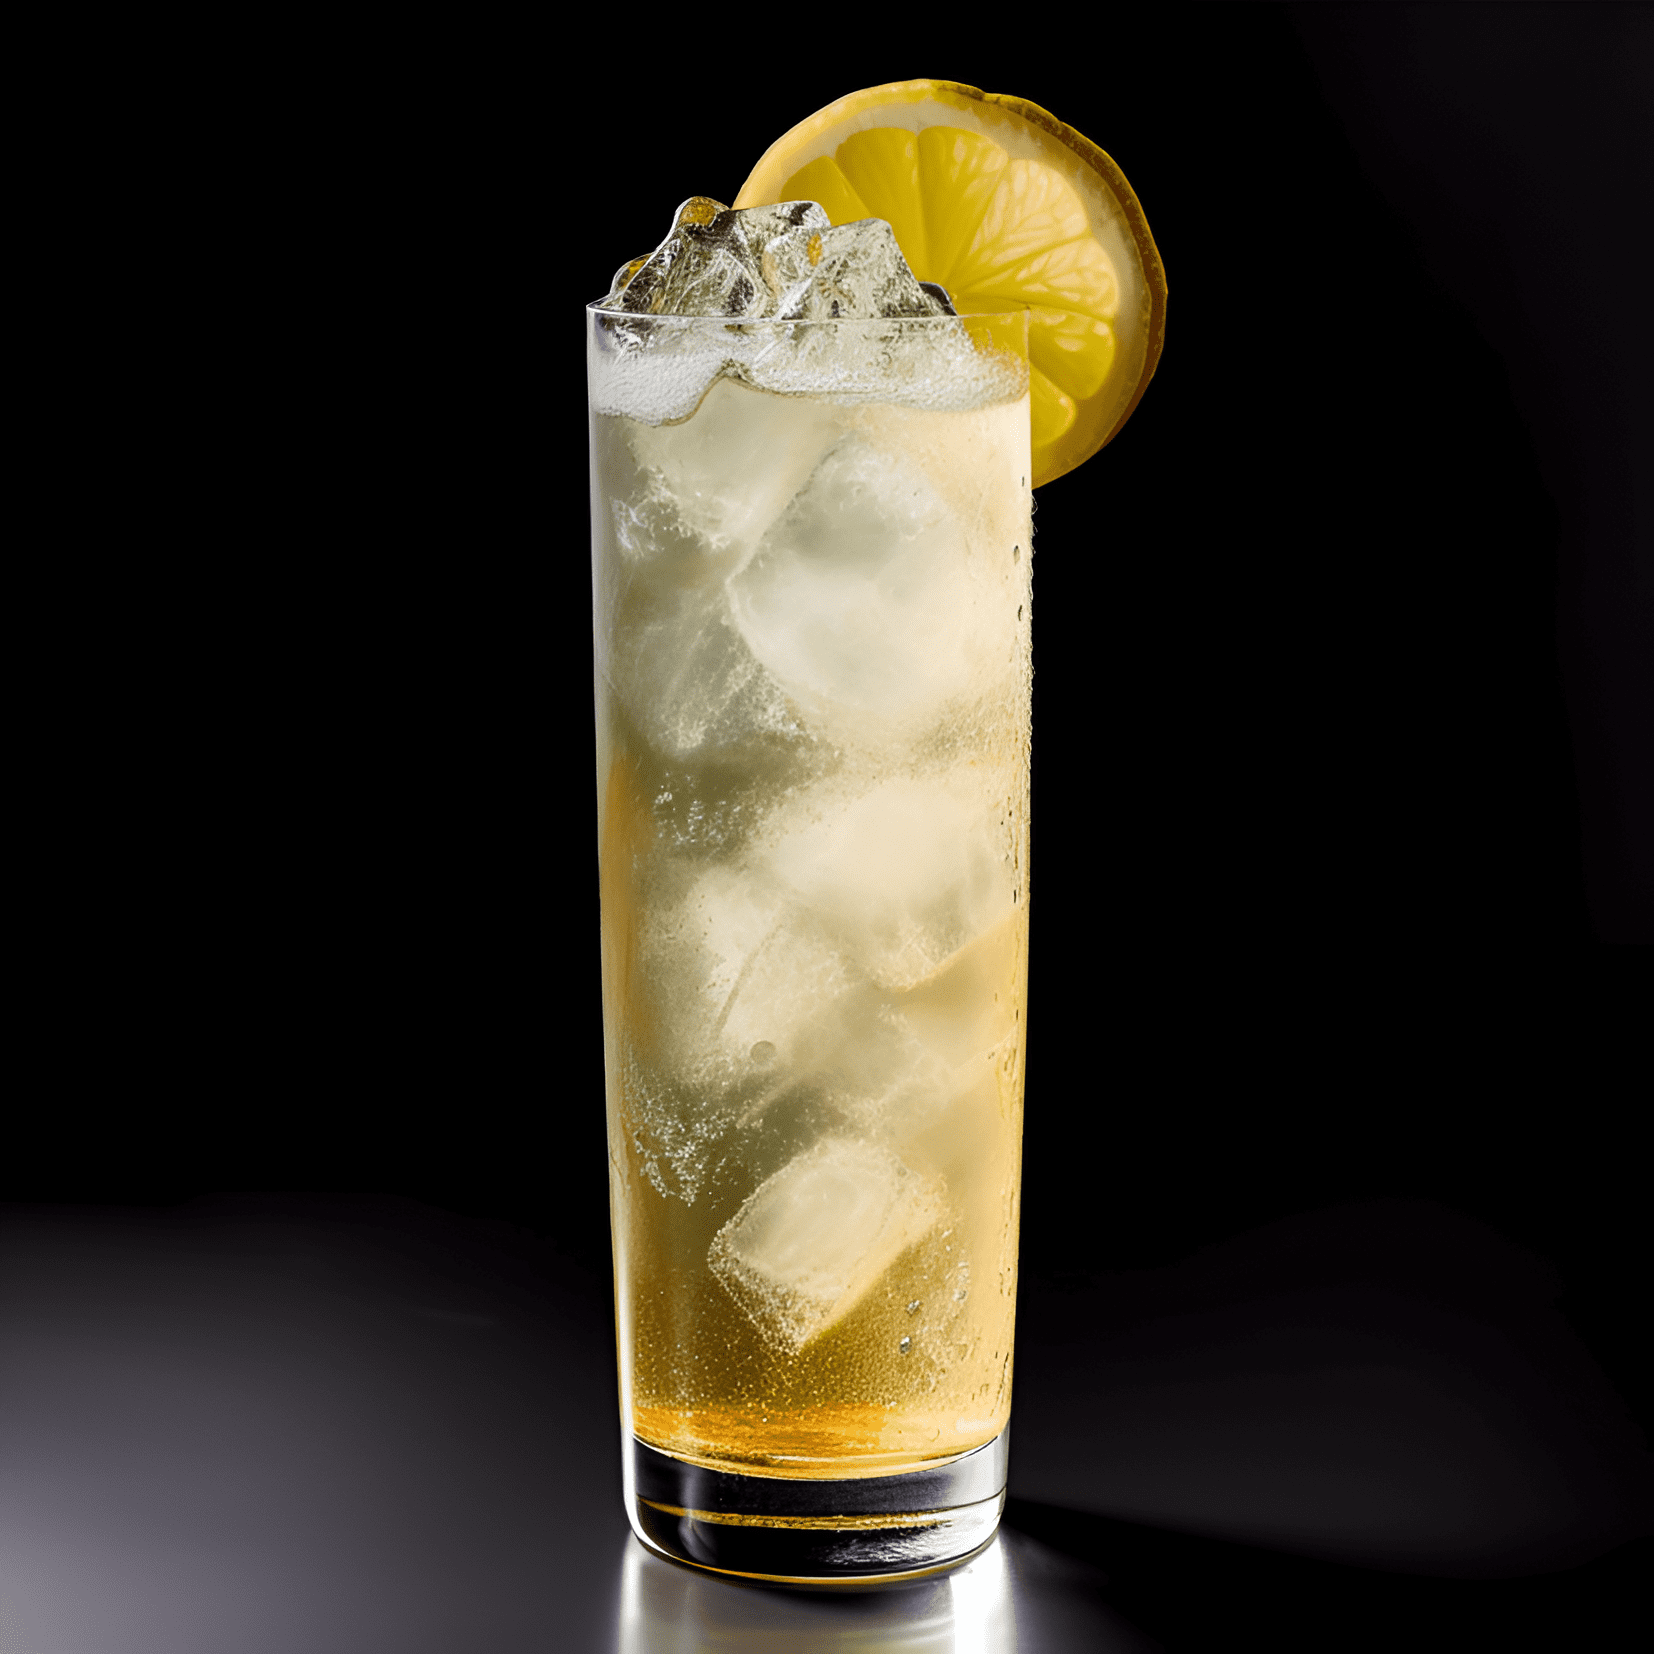 Presbyterian Cocktail Recipe - The Presbyterian cocktail is a well-balanced, refreshing, and slightly effervescent drink. It has a subtle sweetness from the ginger ale, a gentle warmth from the whiskey, and a hint of tartness from the lemon juice. The overall flavor profile is light, crisp, and invigorating.